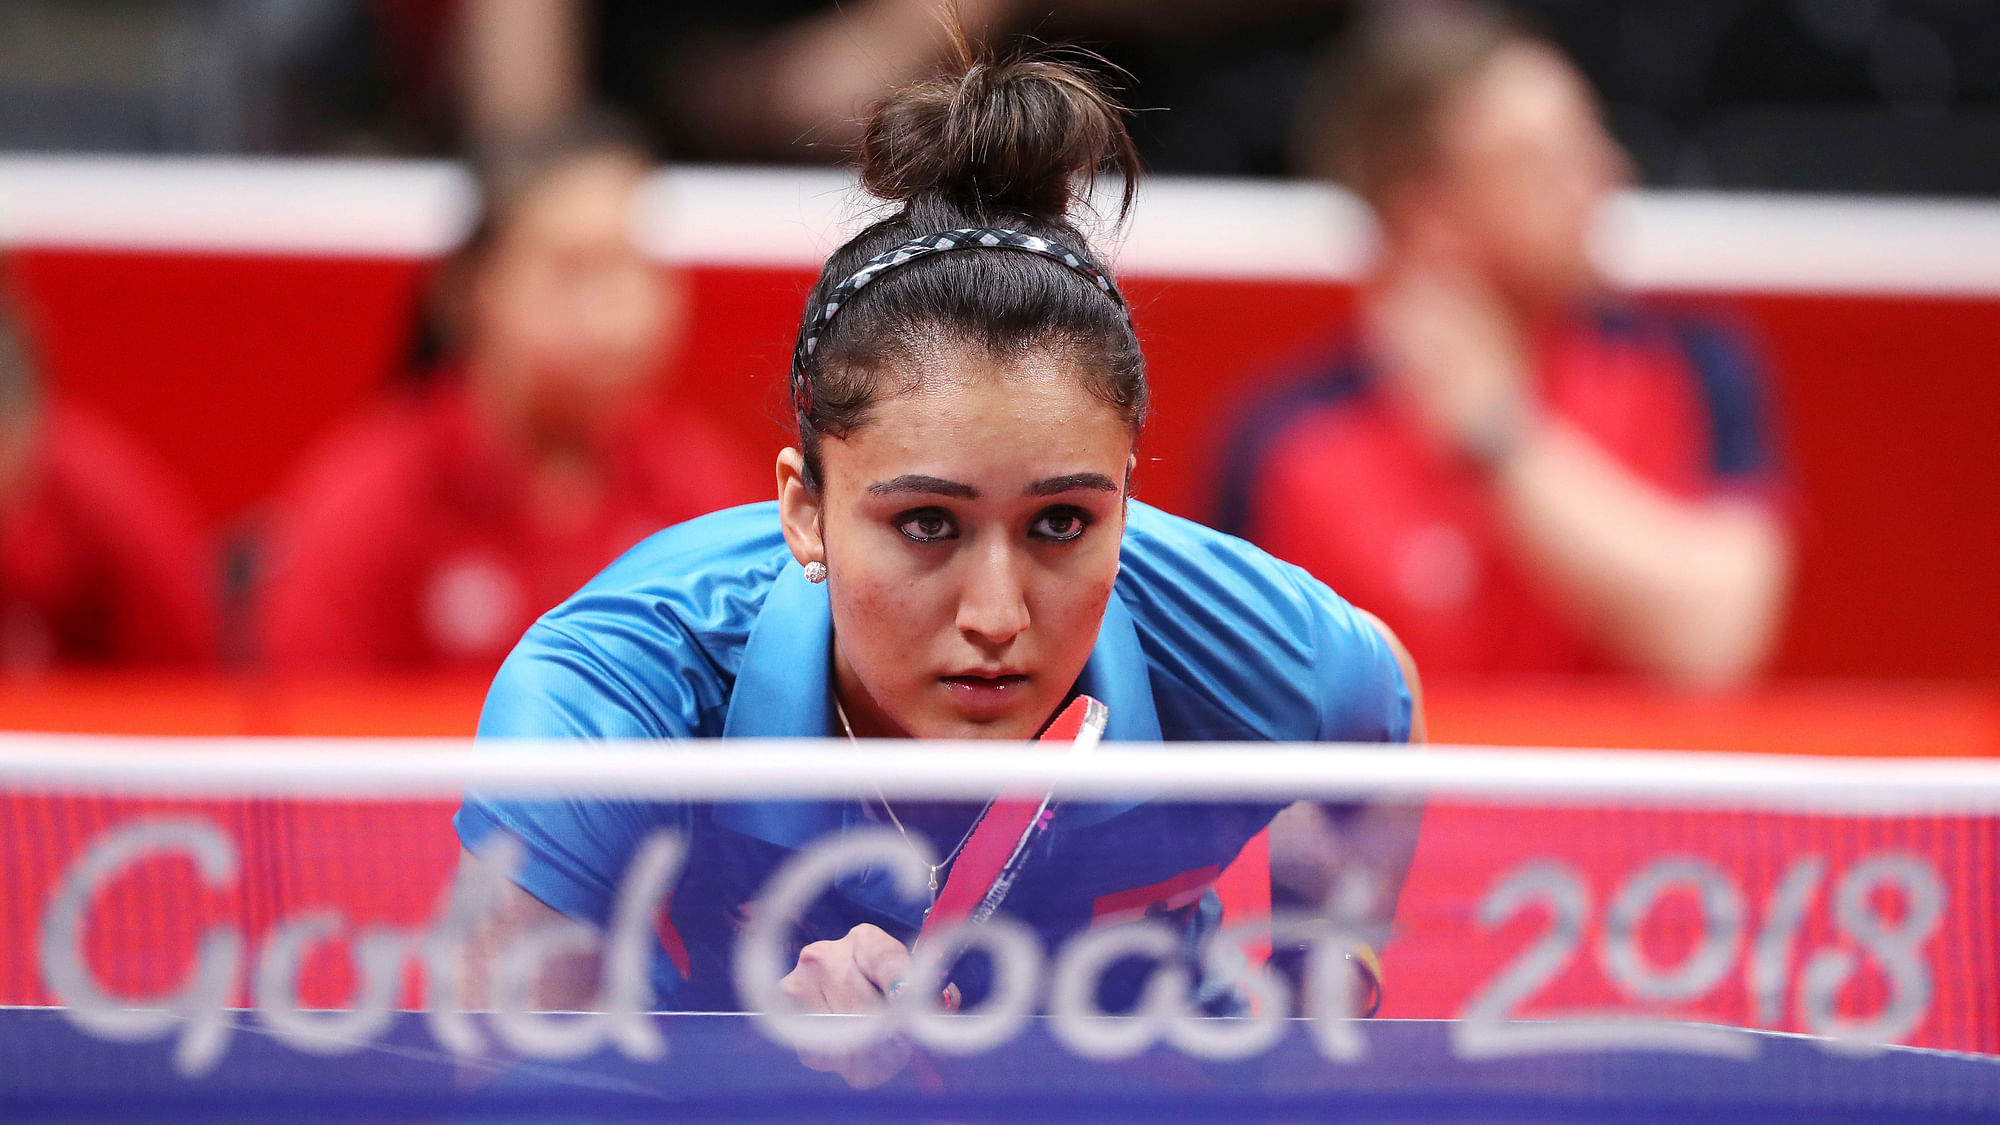 India’s Manika Batra prepares to return serve during a match at the 2018 Commonwealth Games.